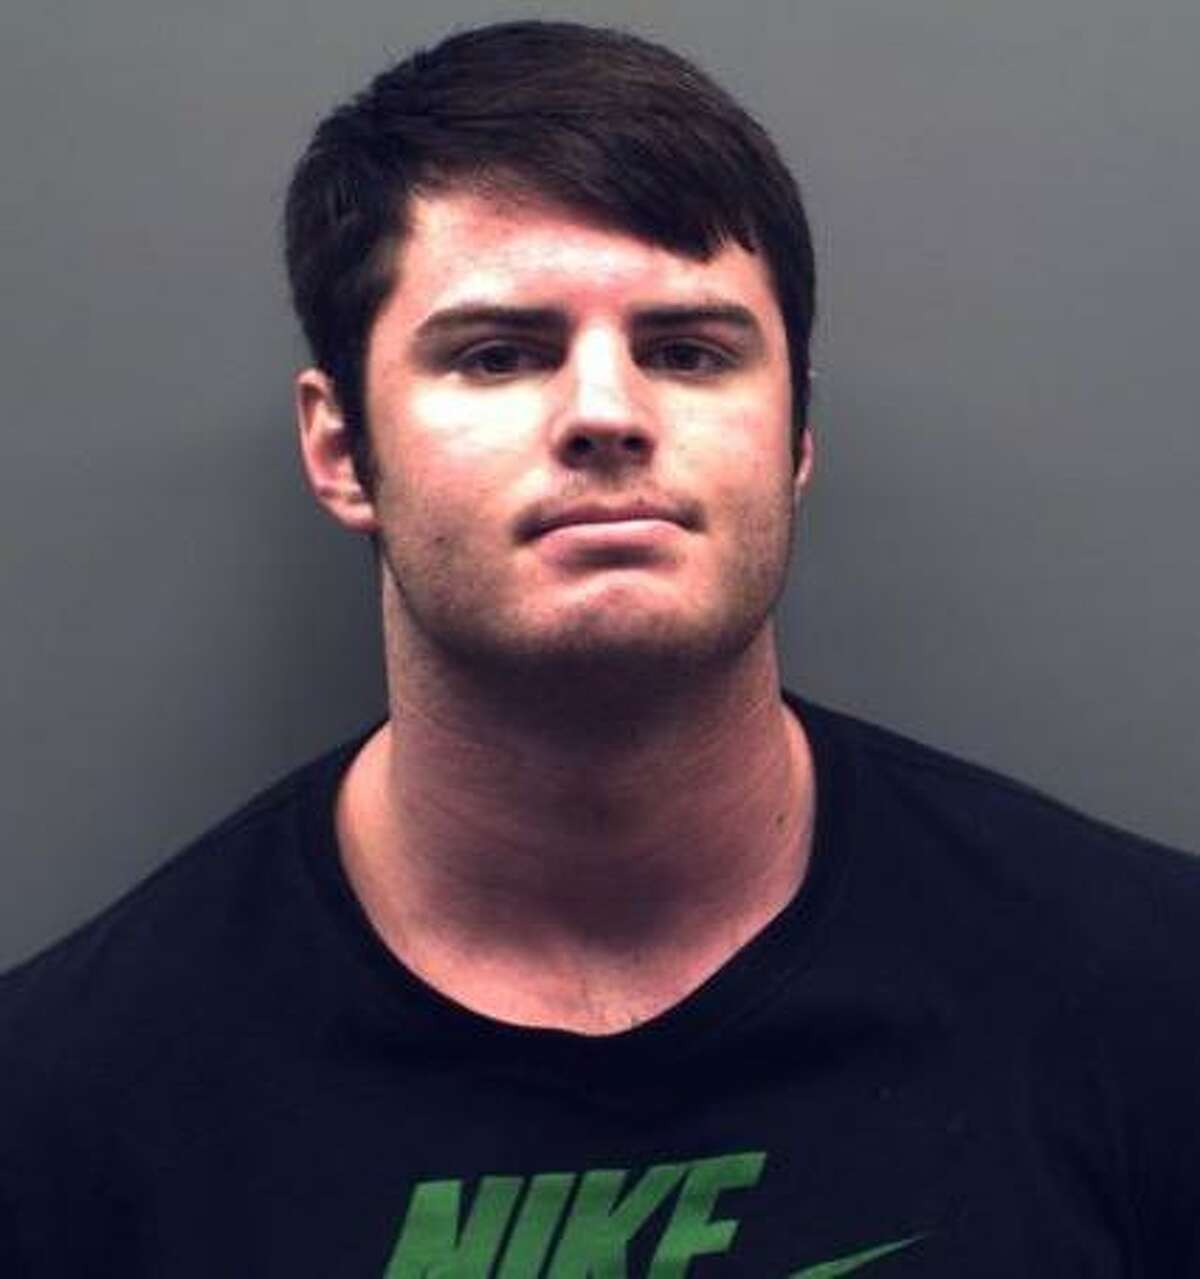 Mark Howerton, 22, was arrested in Tyler and charged with the possession of a controlled substance and delivering marijuana on Feb. 8, 2015. On Wednesday, he was arrested in connection to the death of Trinity cheerleader Cayley Mandadi.